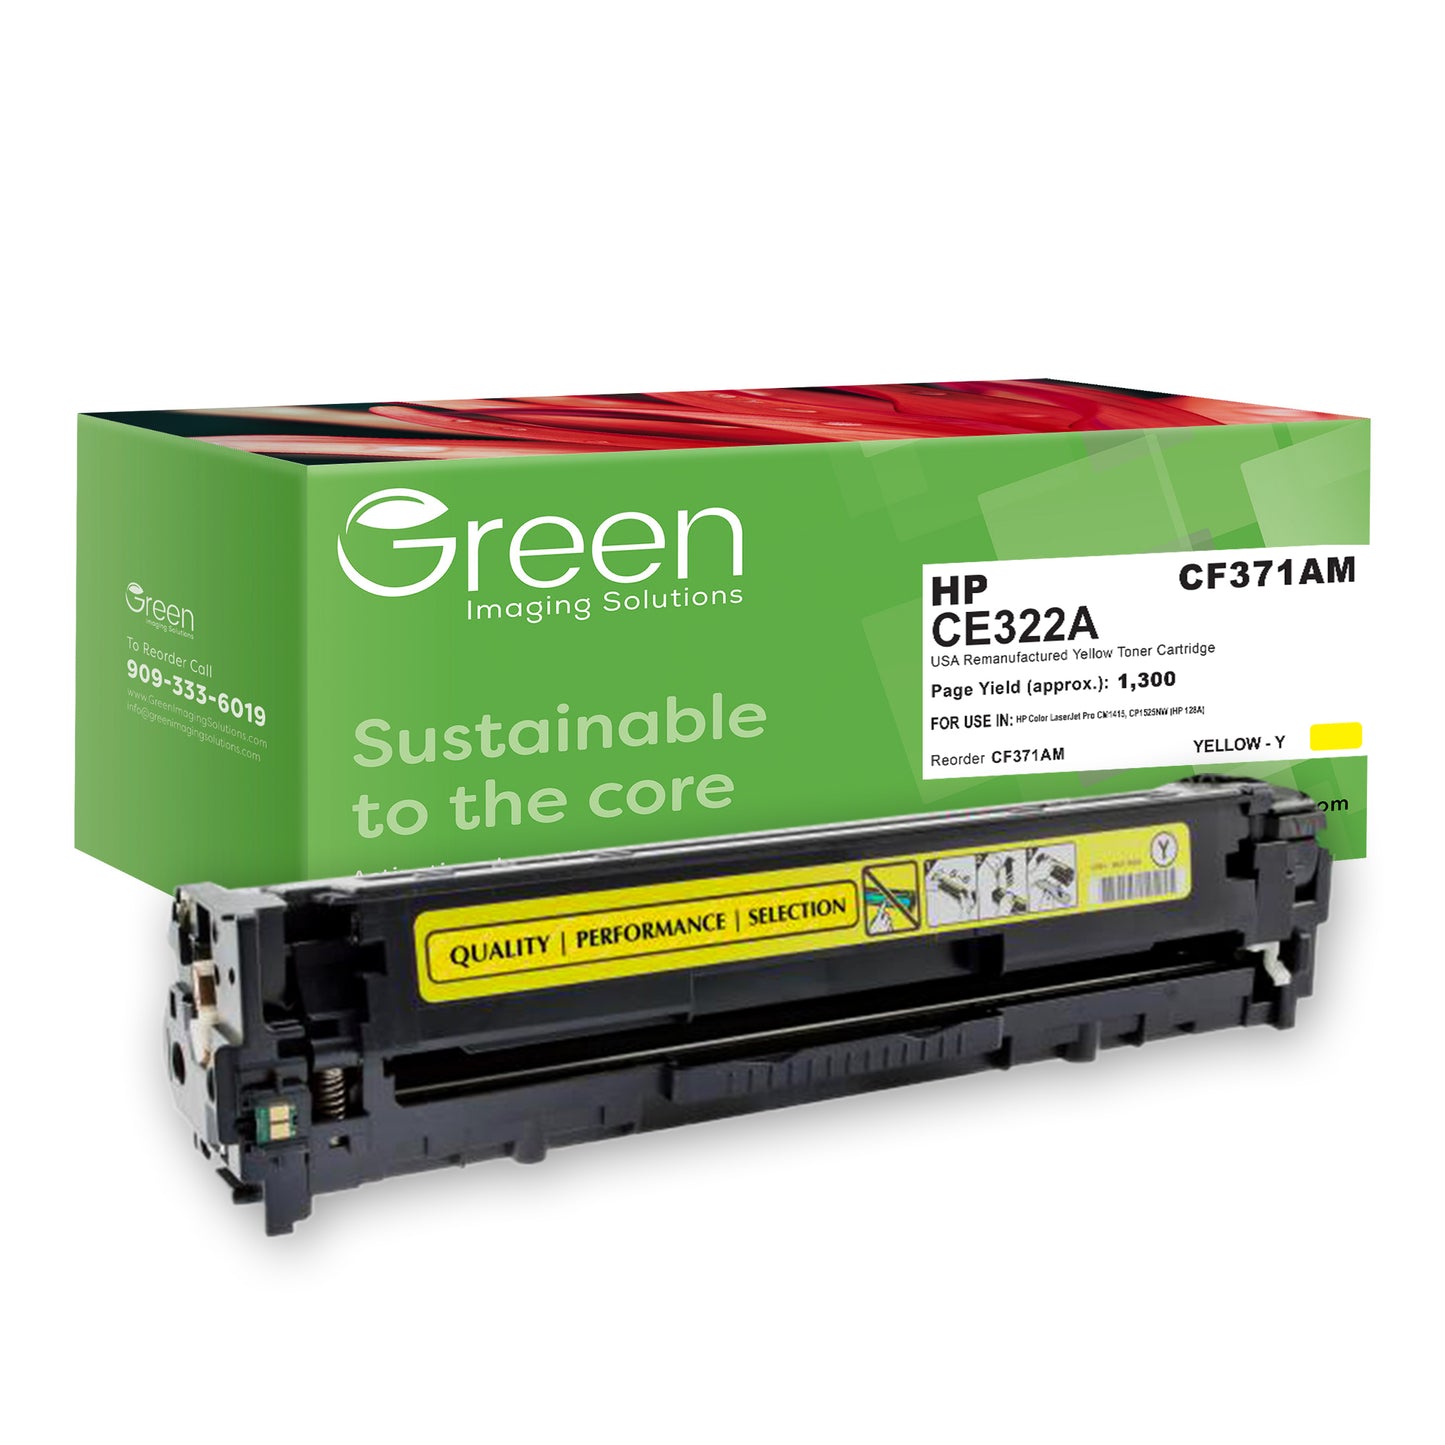 GIS USA Remanufactured Yellow Toner Cartridge for HP CE322A (HP 128A)